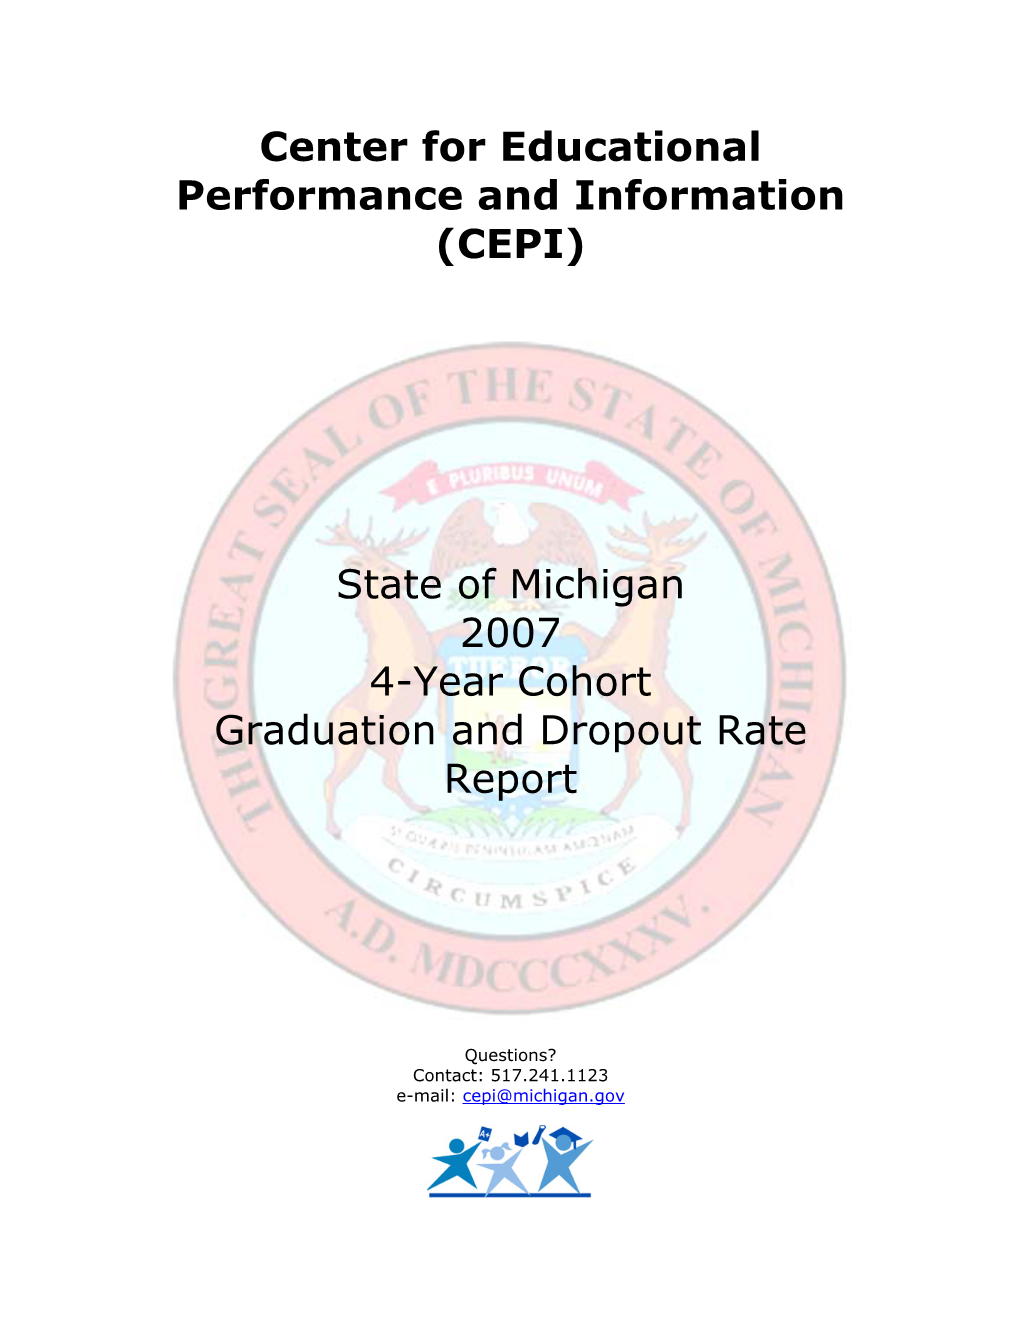 State of Michigan 2007 4-Year Cohrt Graduation and Dropout Rate Report